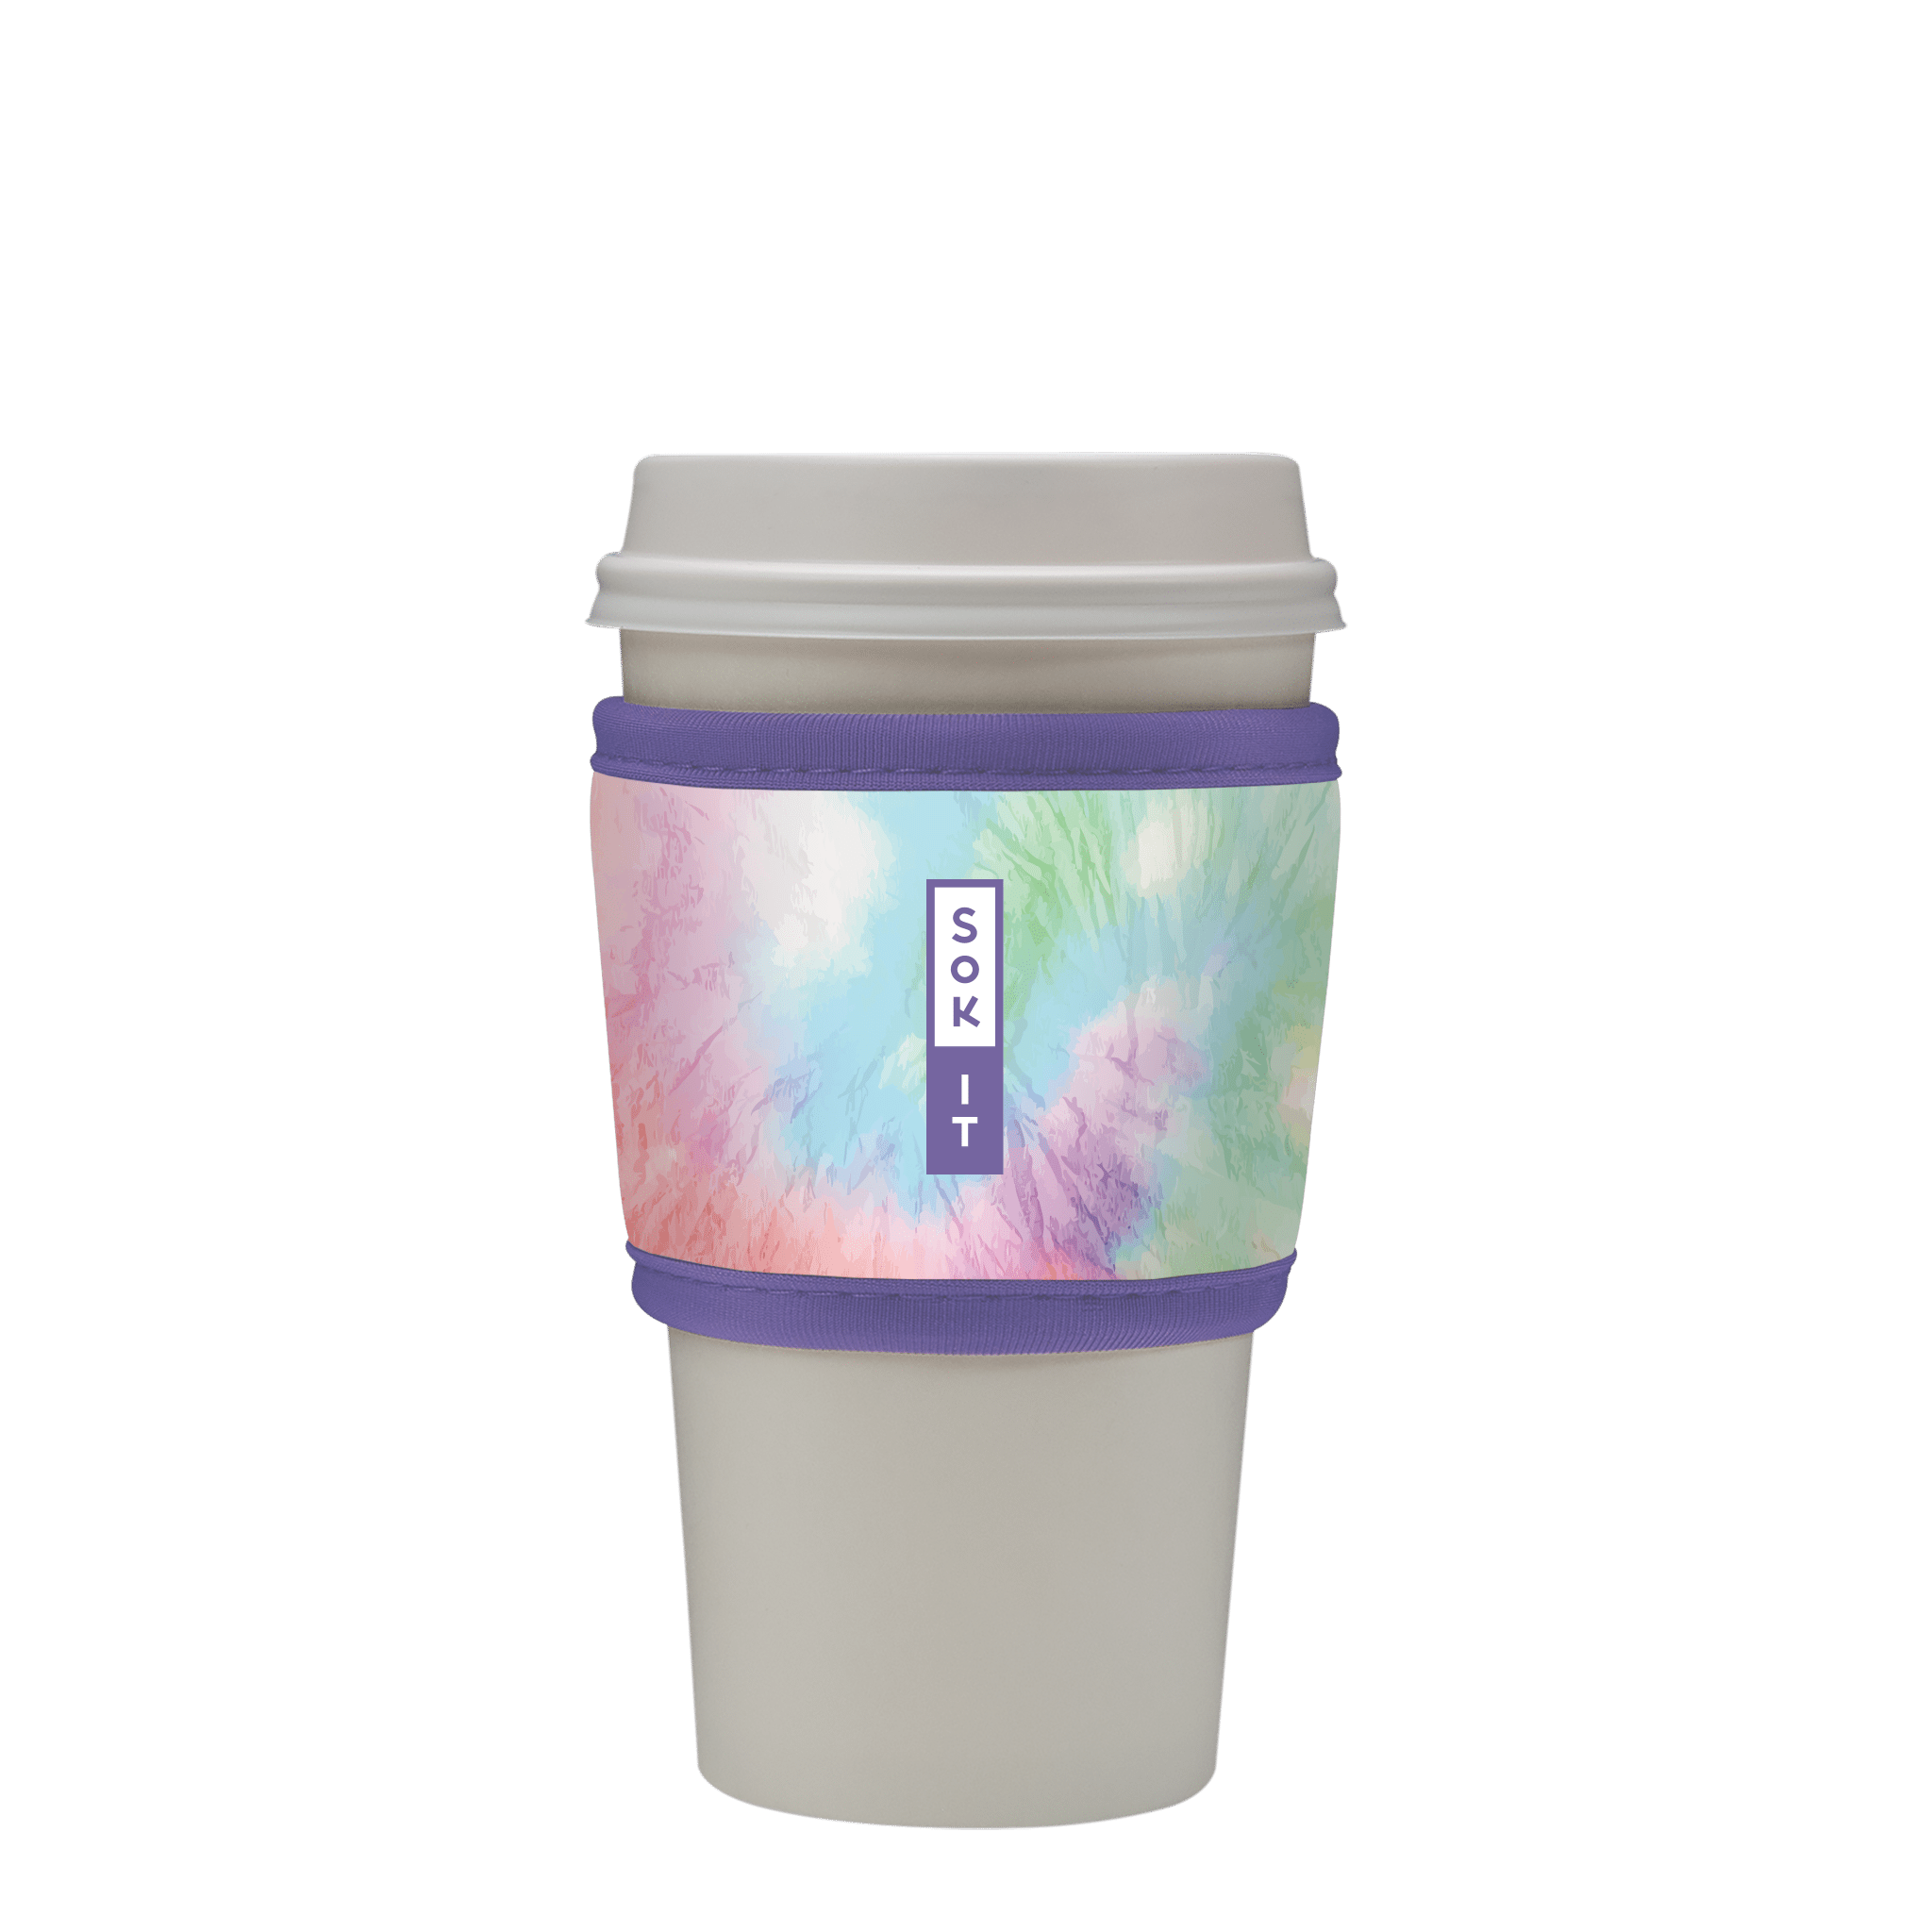 HotSok Daydreaming 1-Size Cup